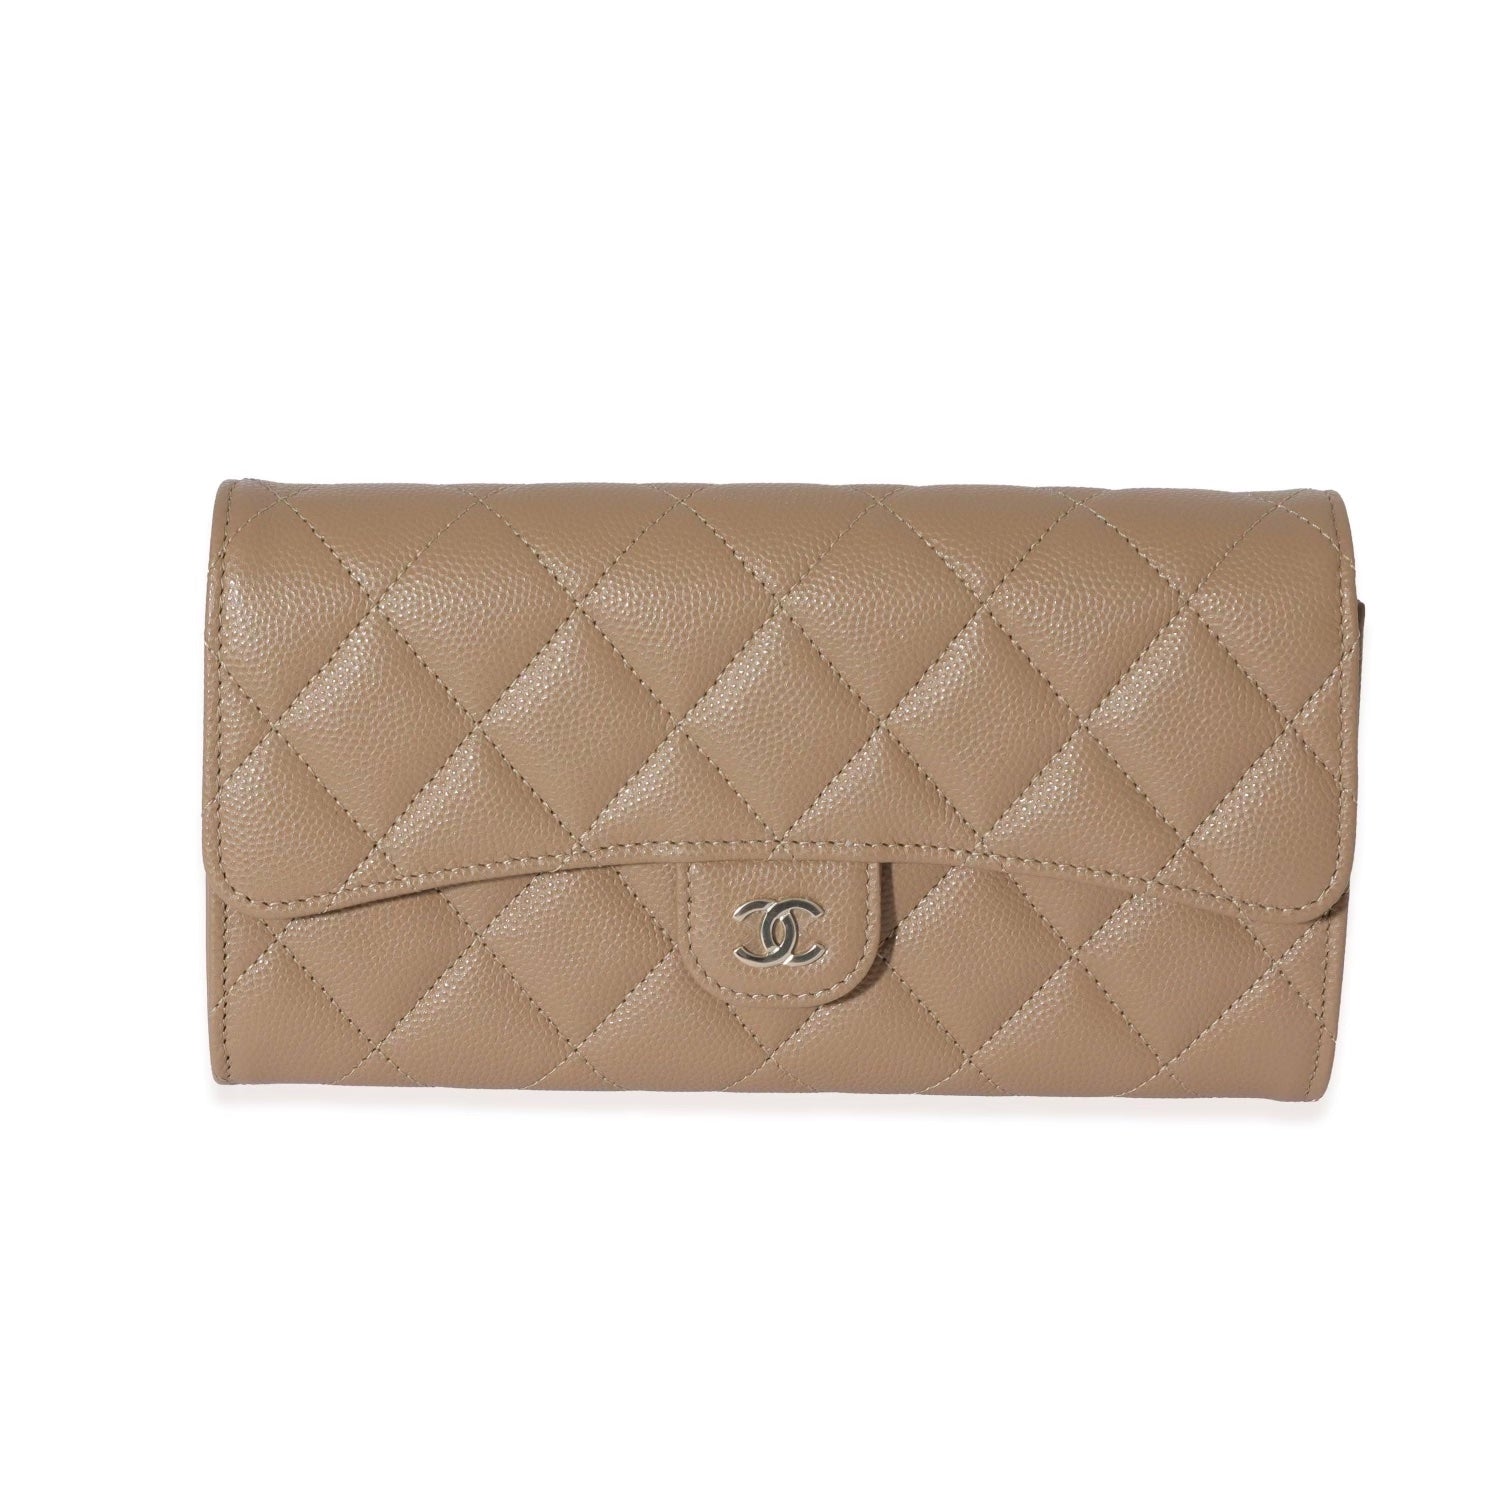 Chanel Classic Long Wallet - NEW!!